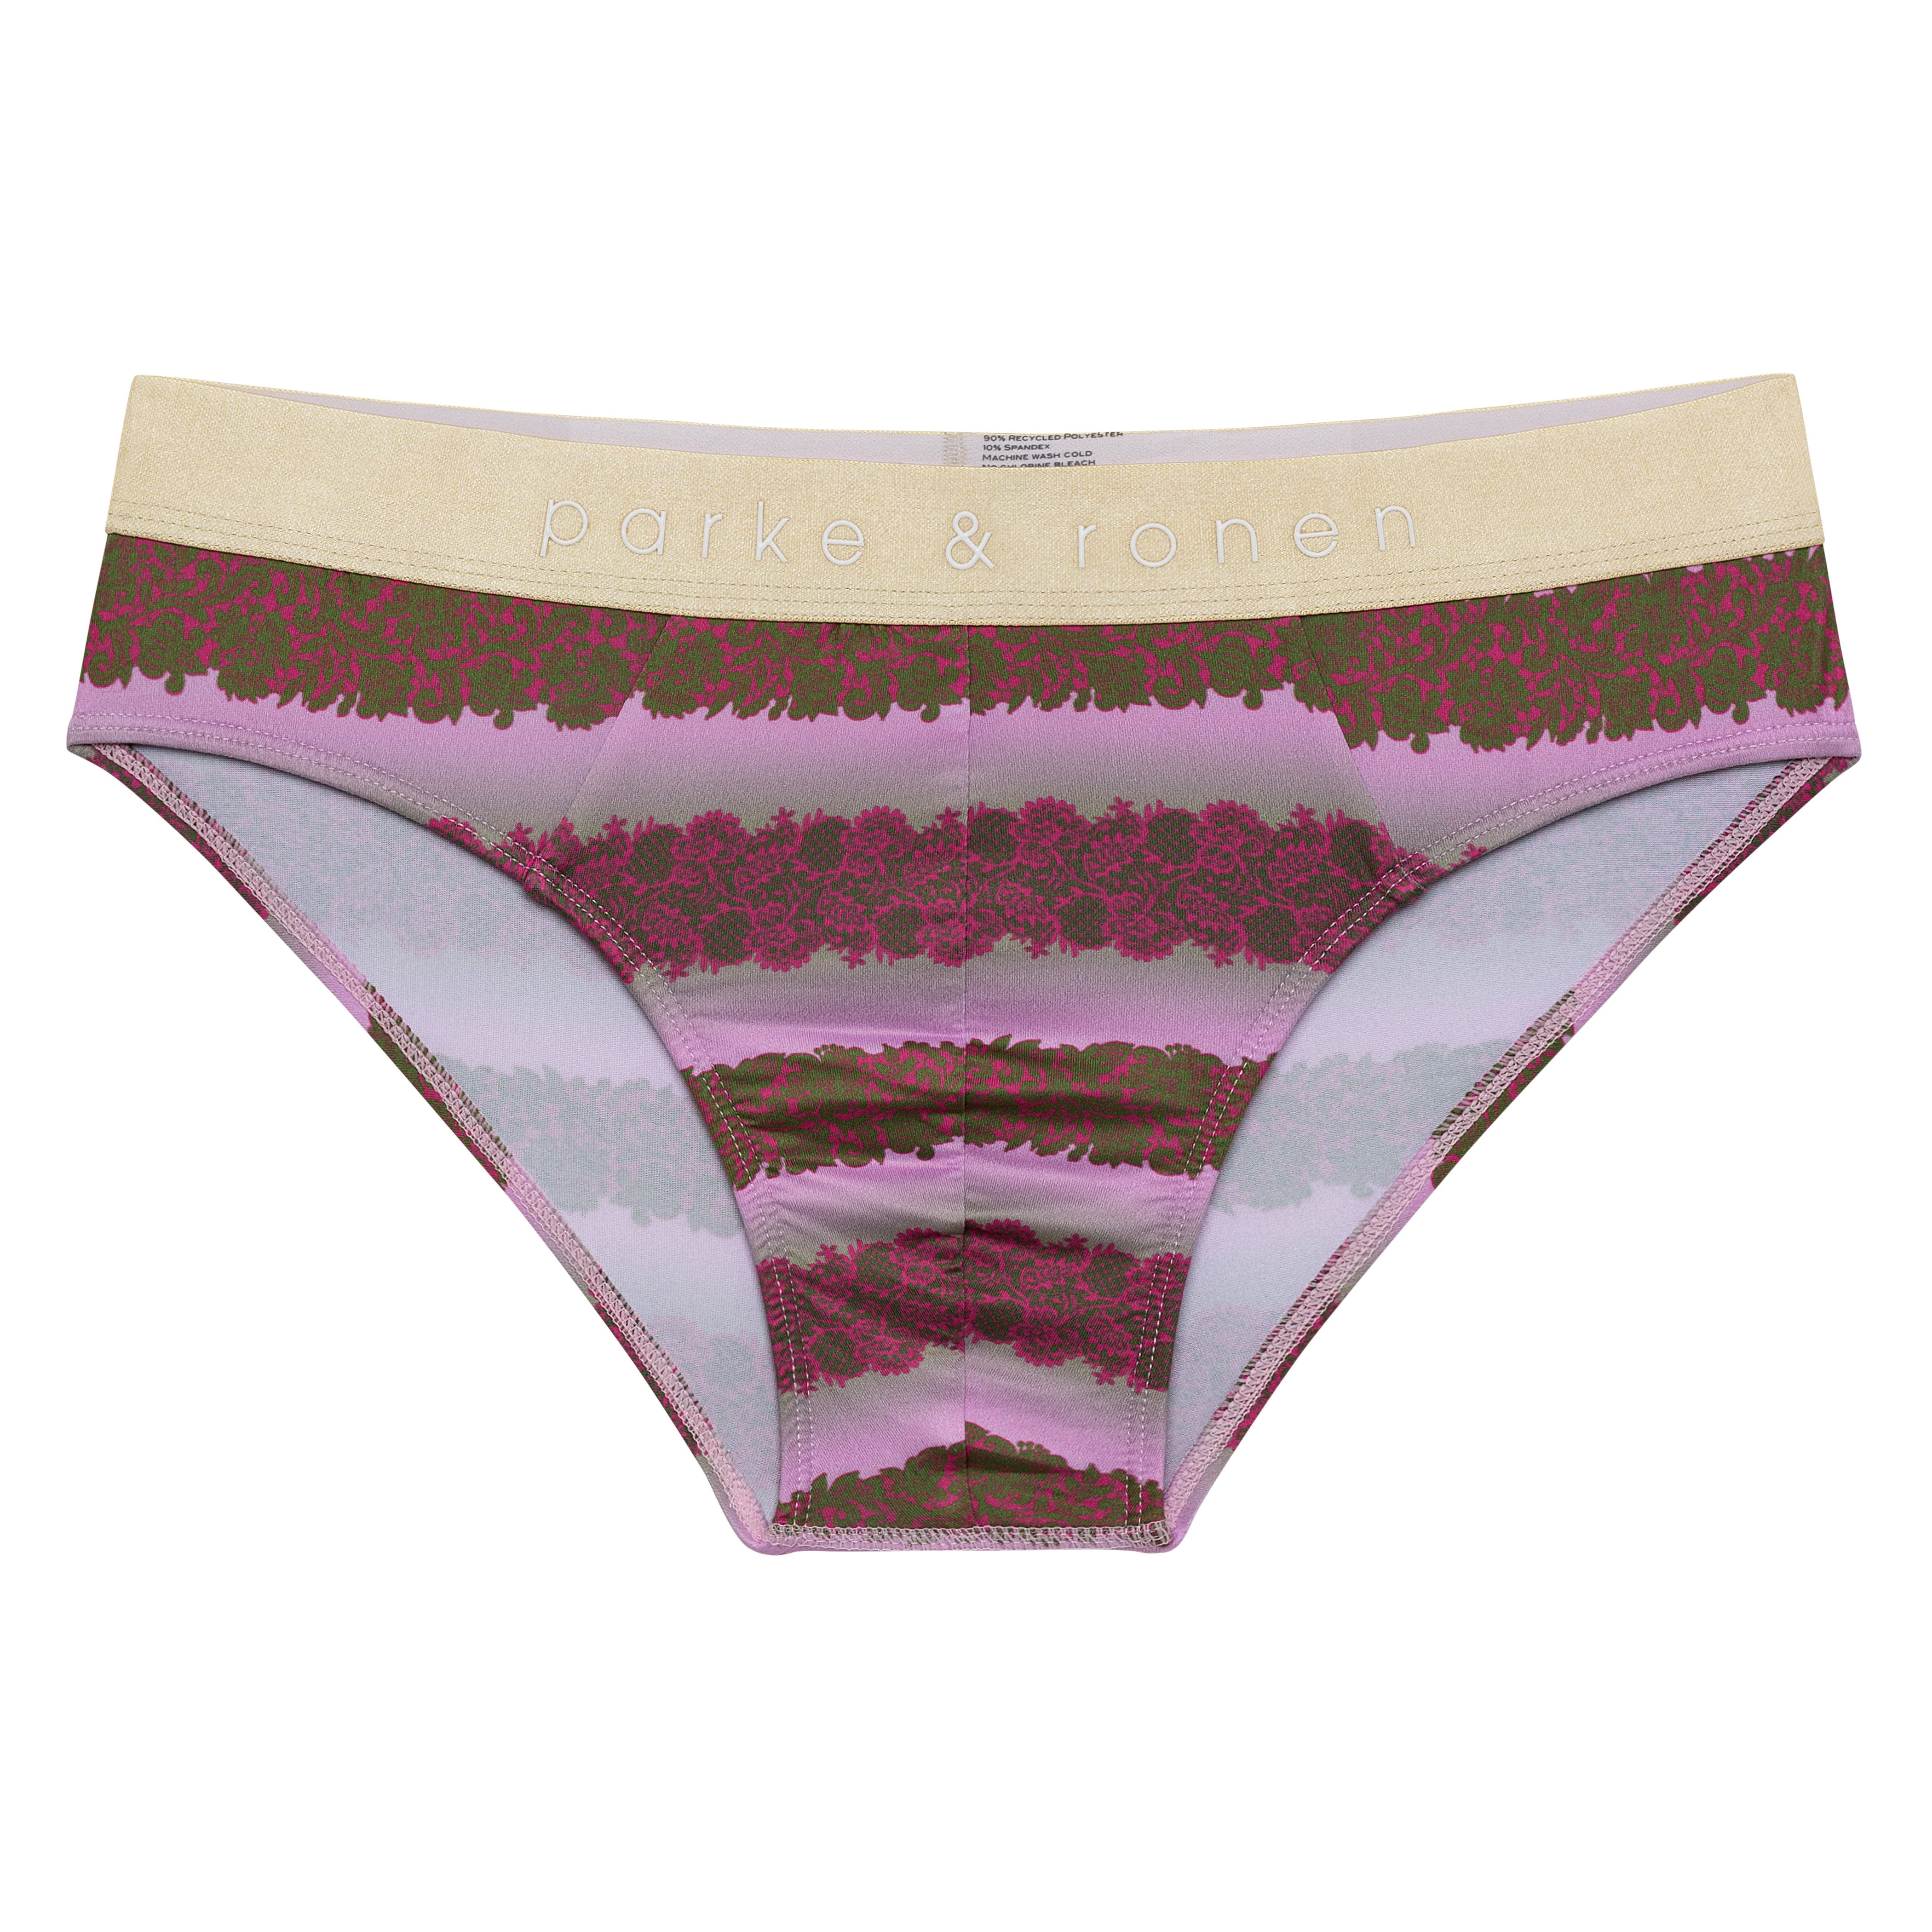 SAVE 50%- Strawberry Venetian Lace Low Rise Brief